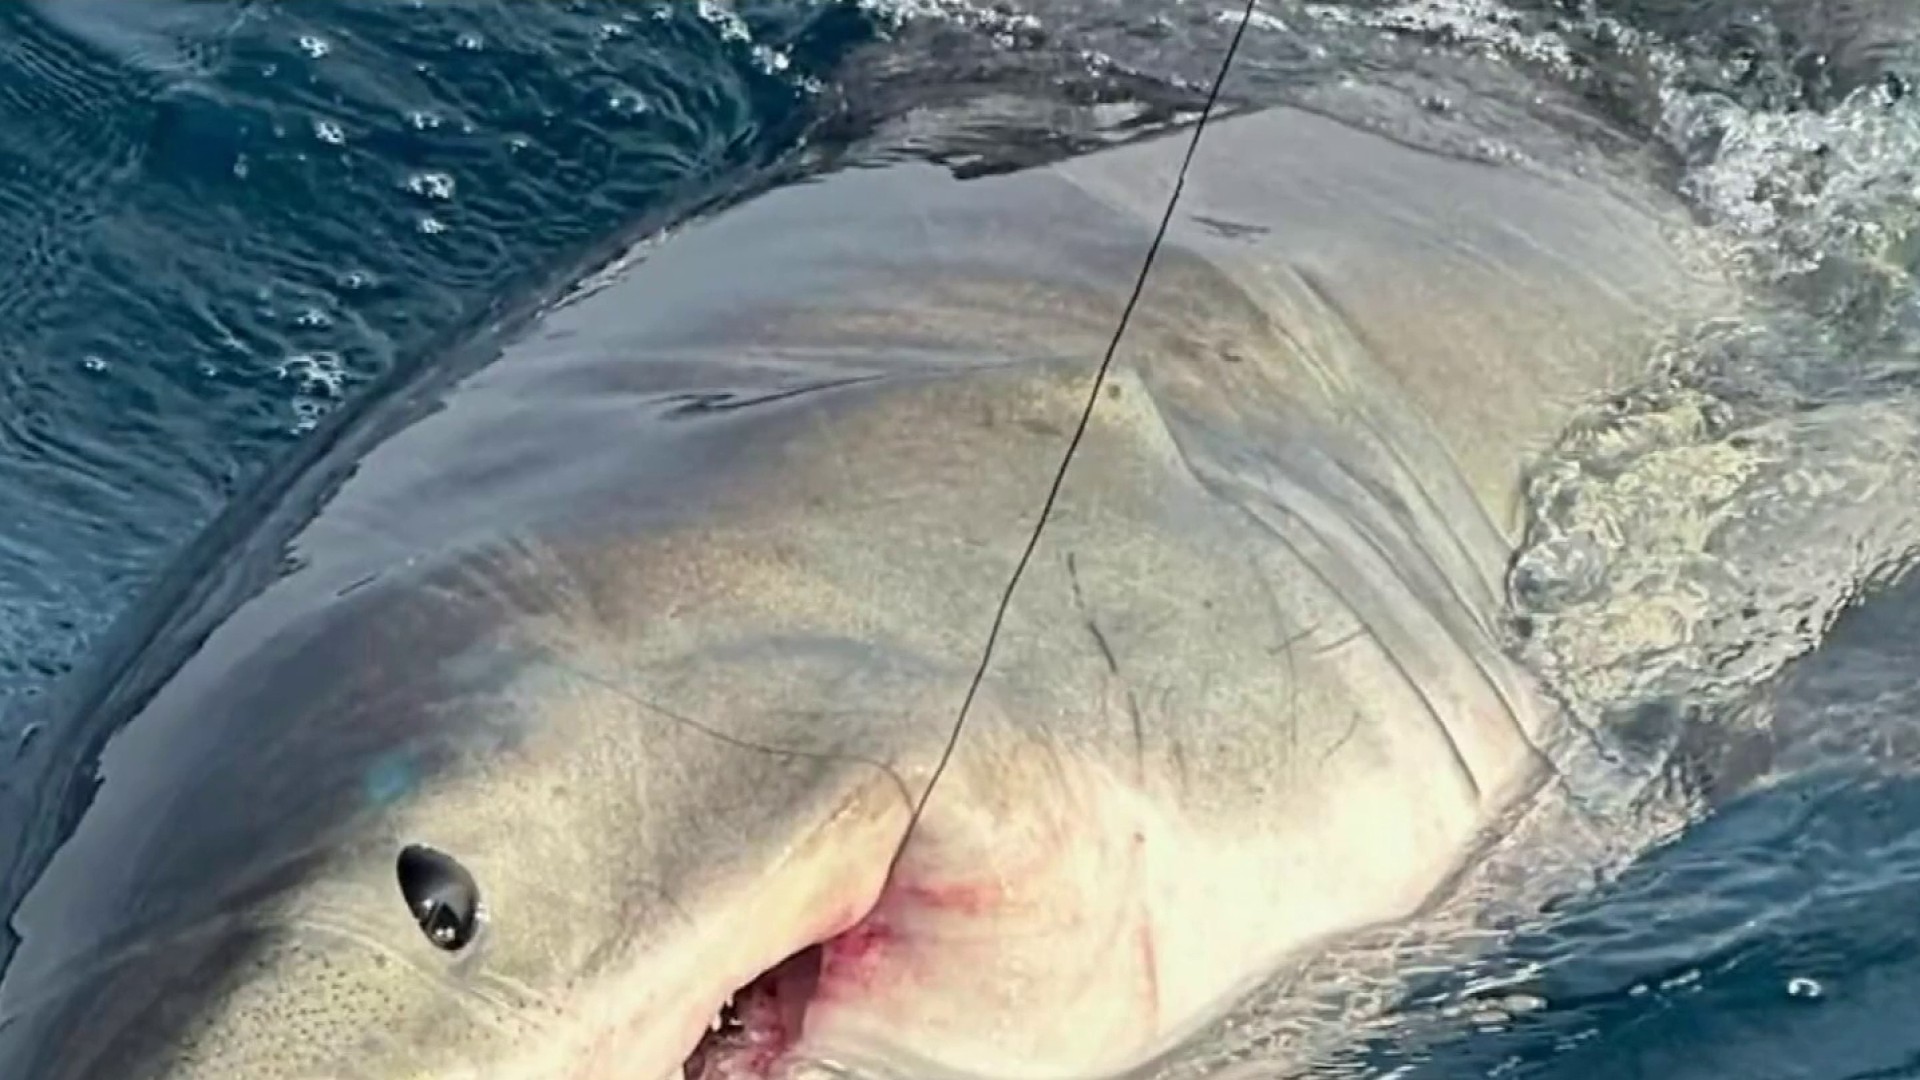 WHAT A CATCH: Video shows great white shark hooked near Ponce Inlet